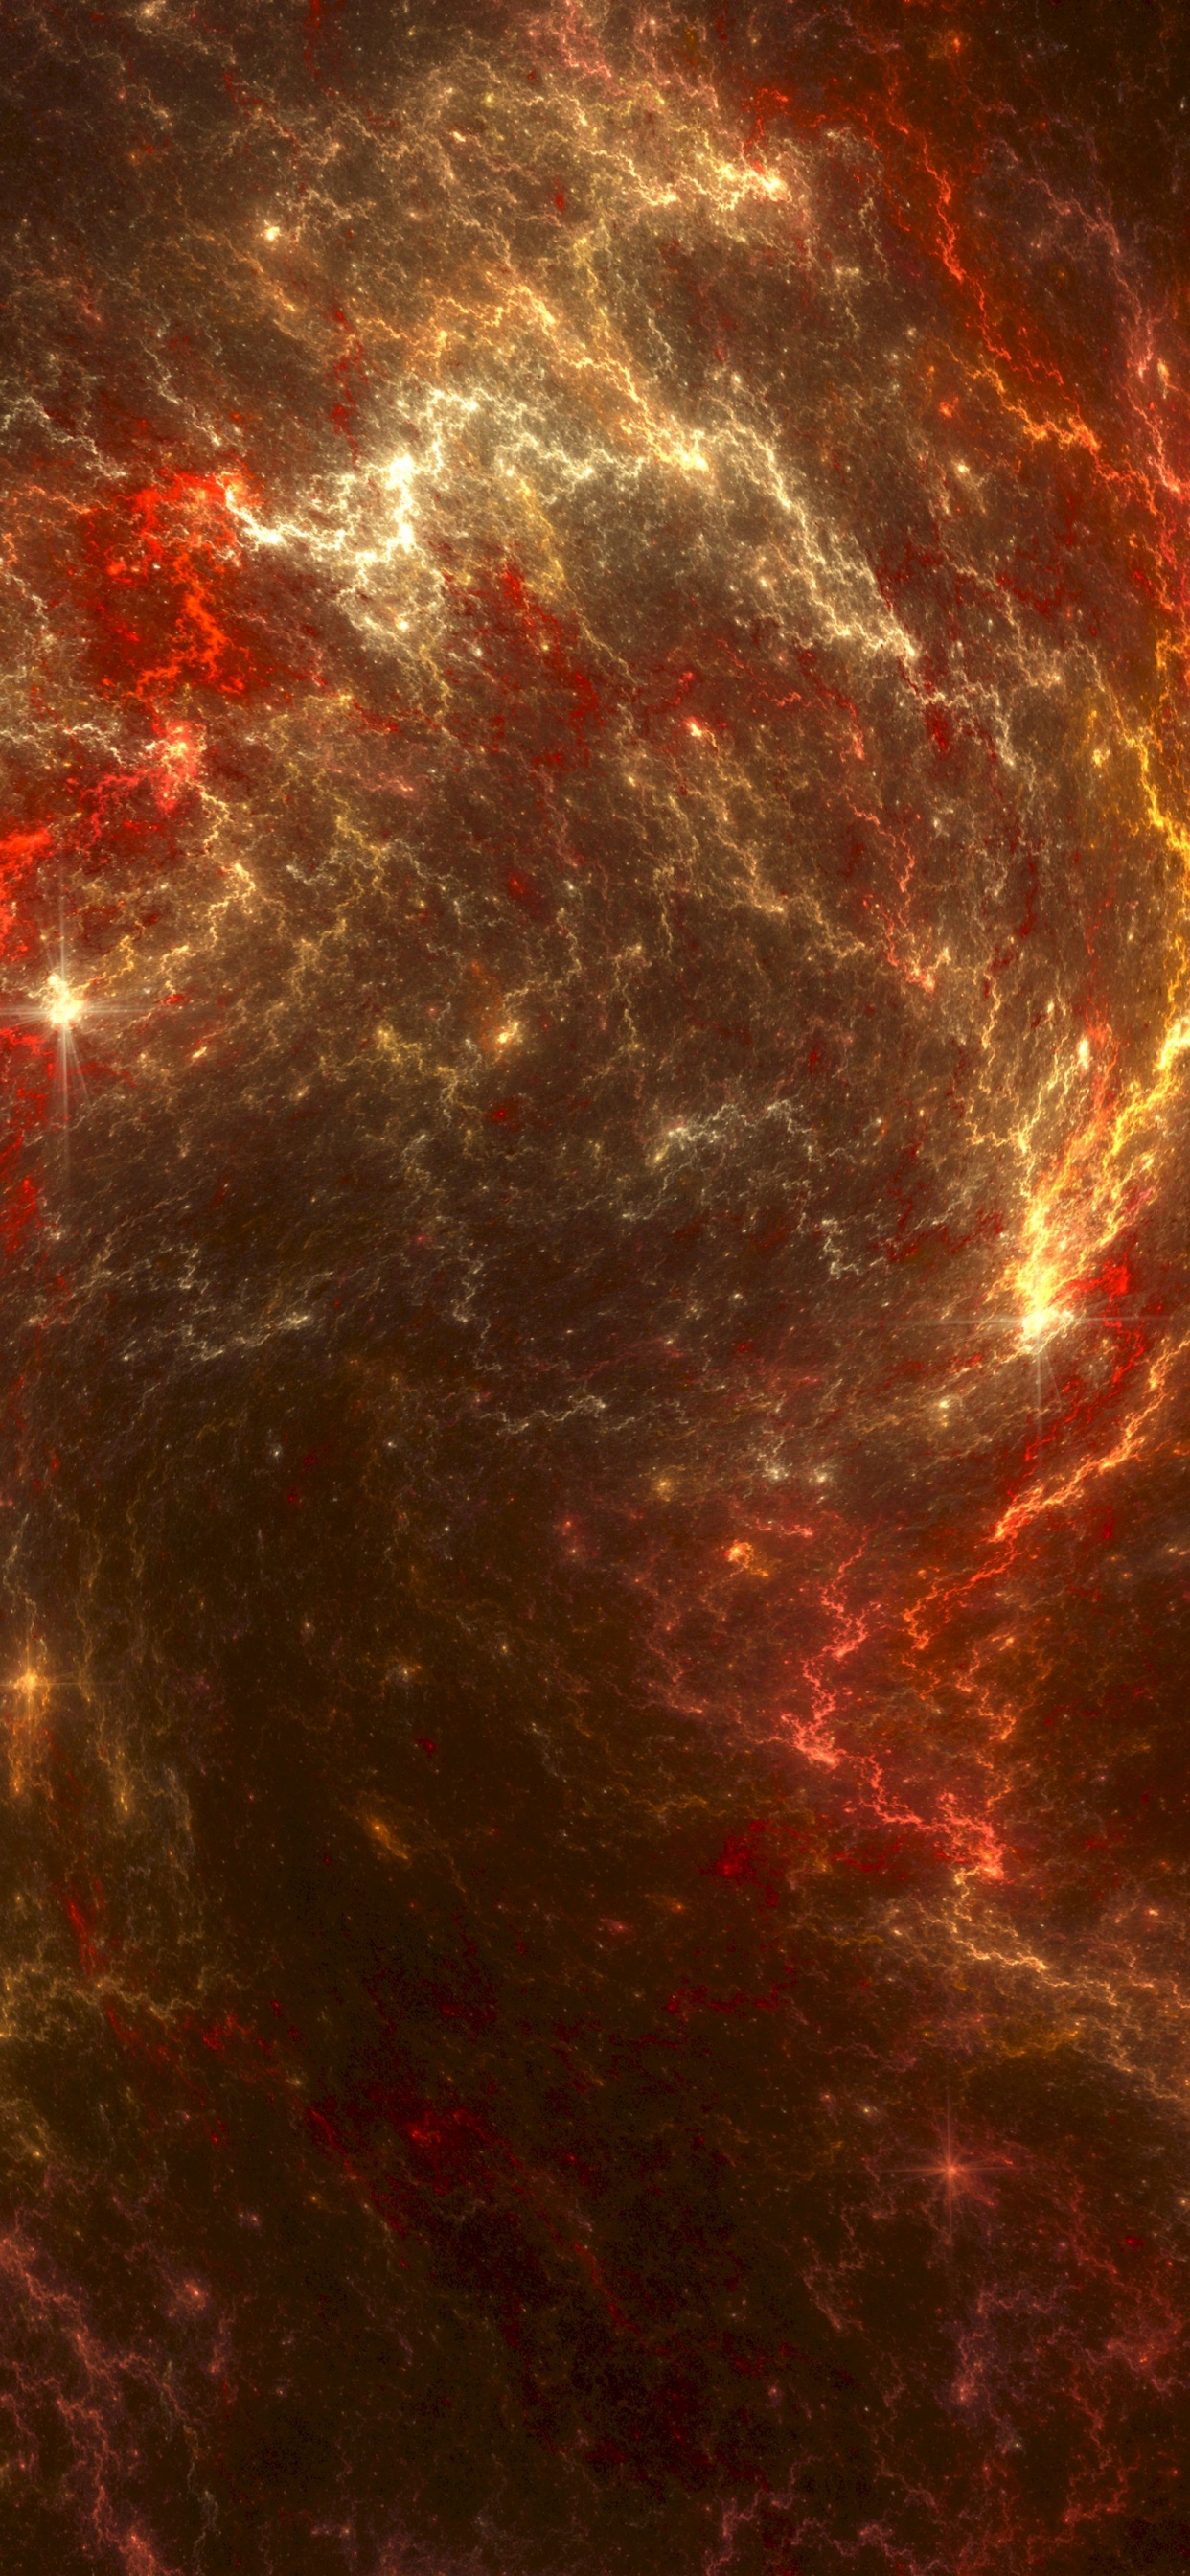 Red and Black Galaxy Illustration. Wallpaper in 1242x2688 Resolution